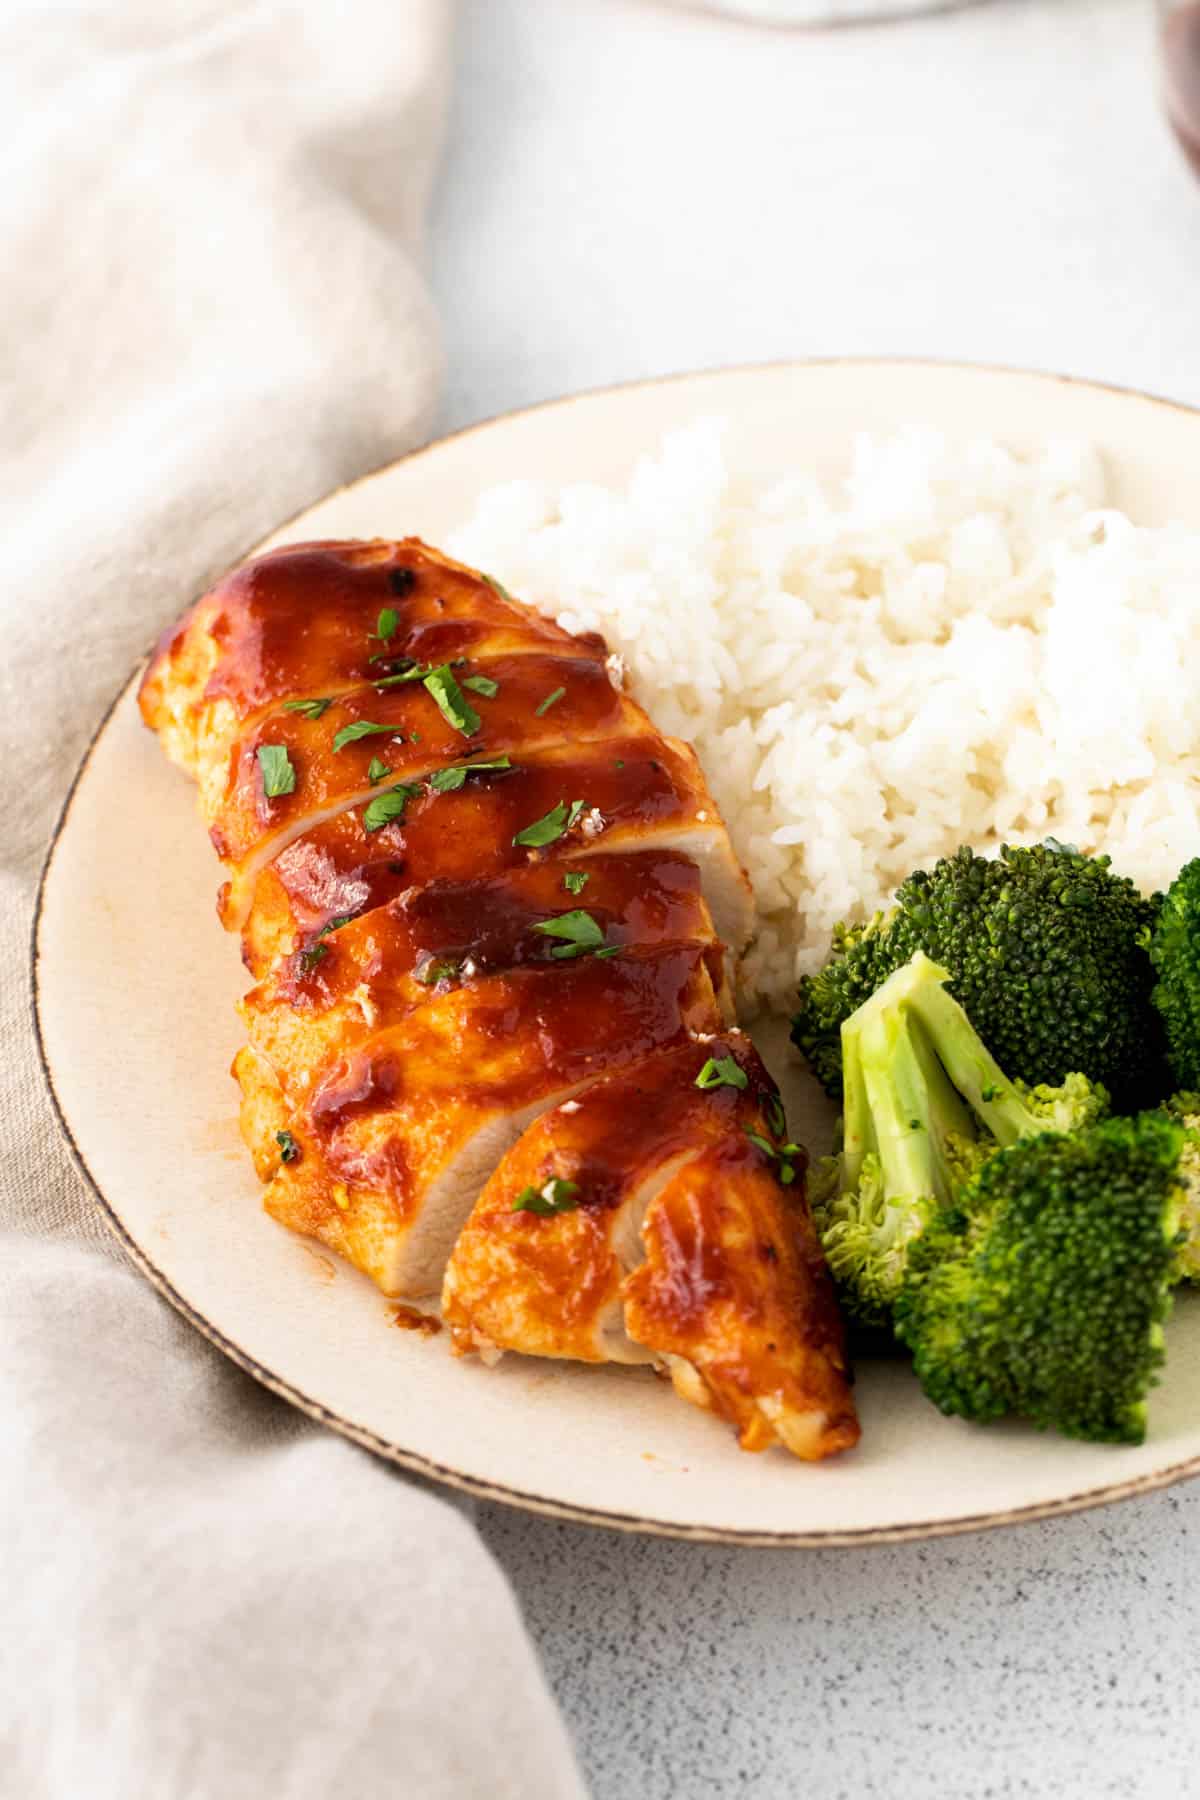 Angle image of sliced chicken breast with BBQ sauce with rice and broccoli